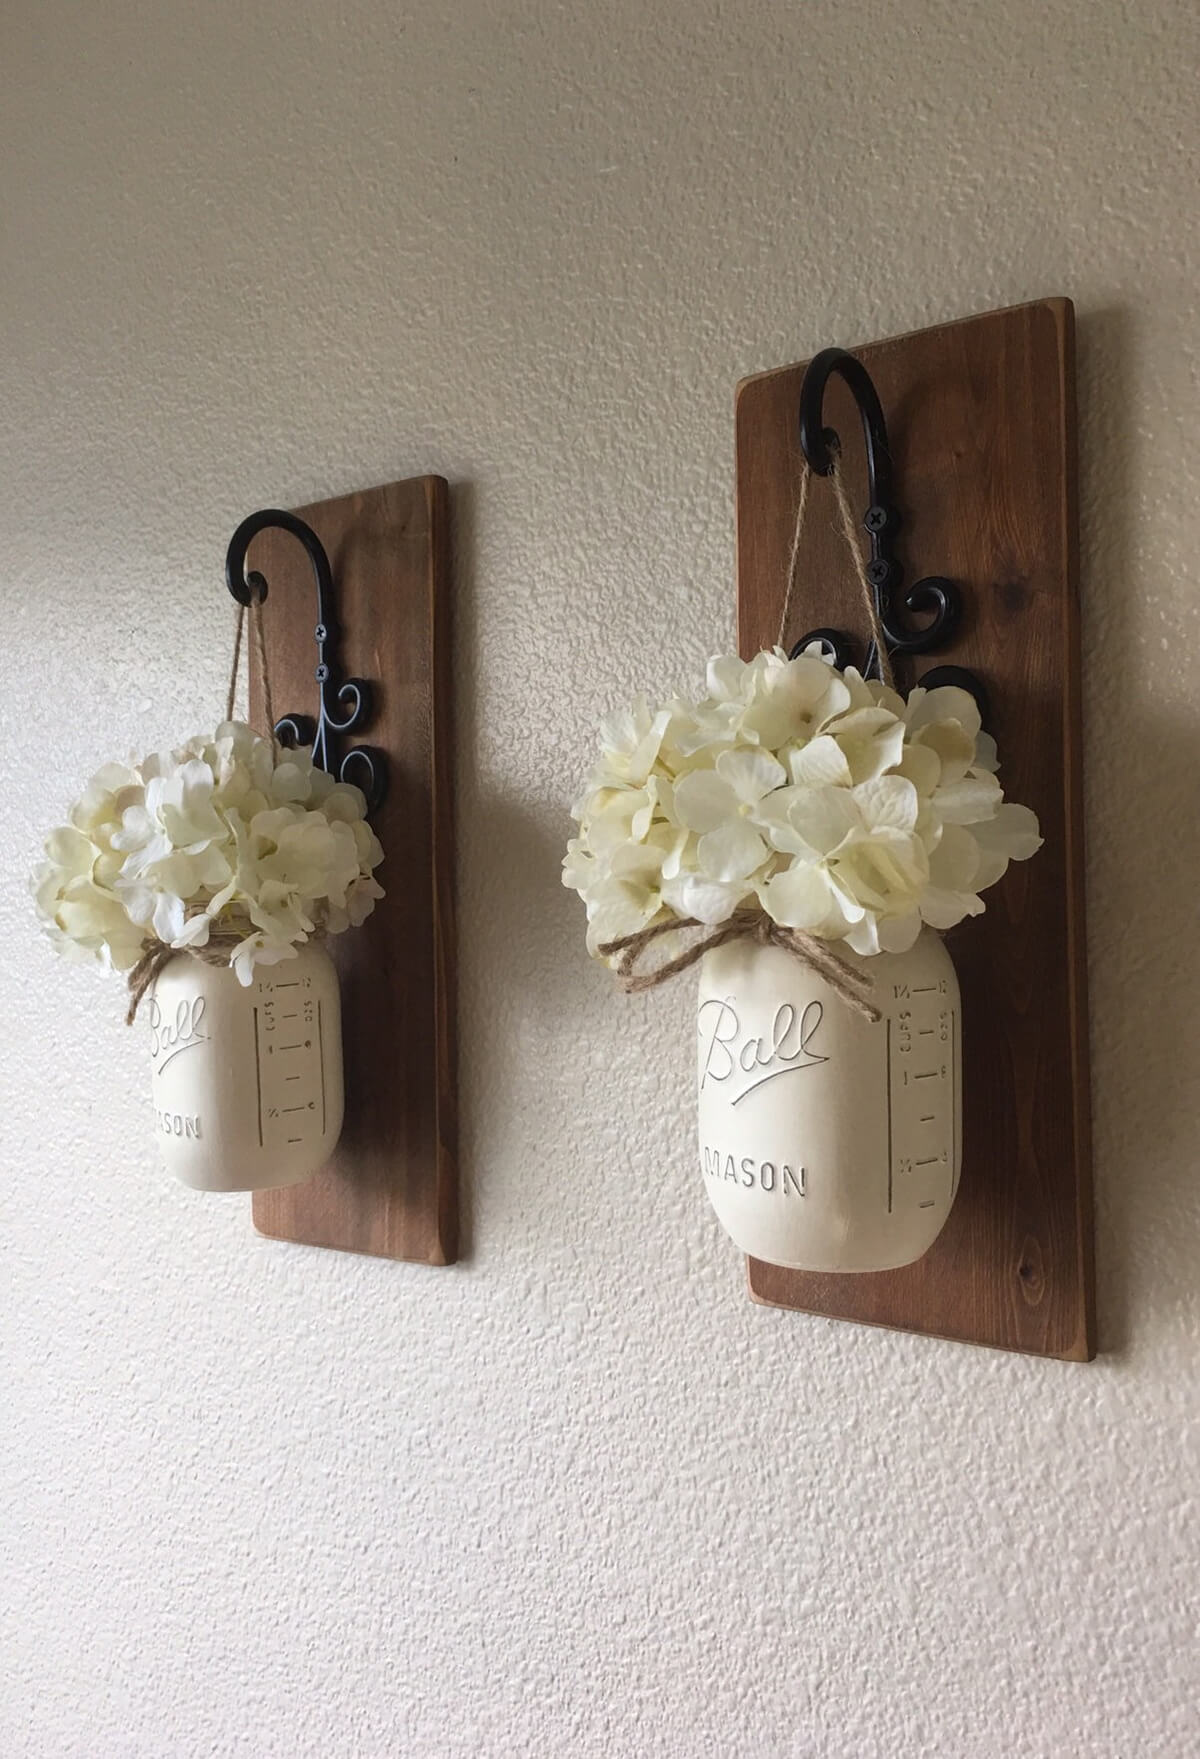 Wooden Wall Hangings with Iron Hooks and Ball Jars